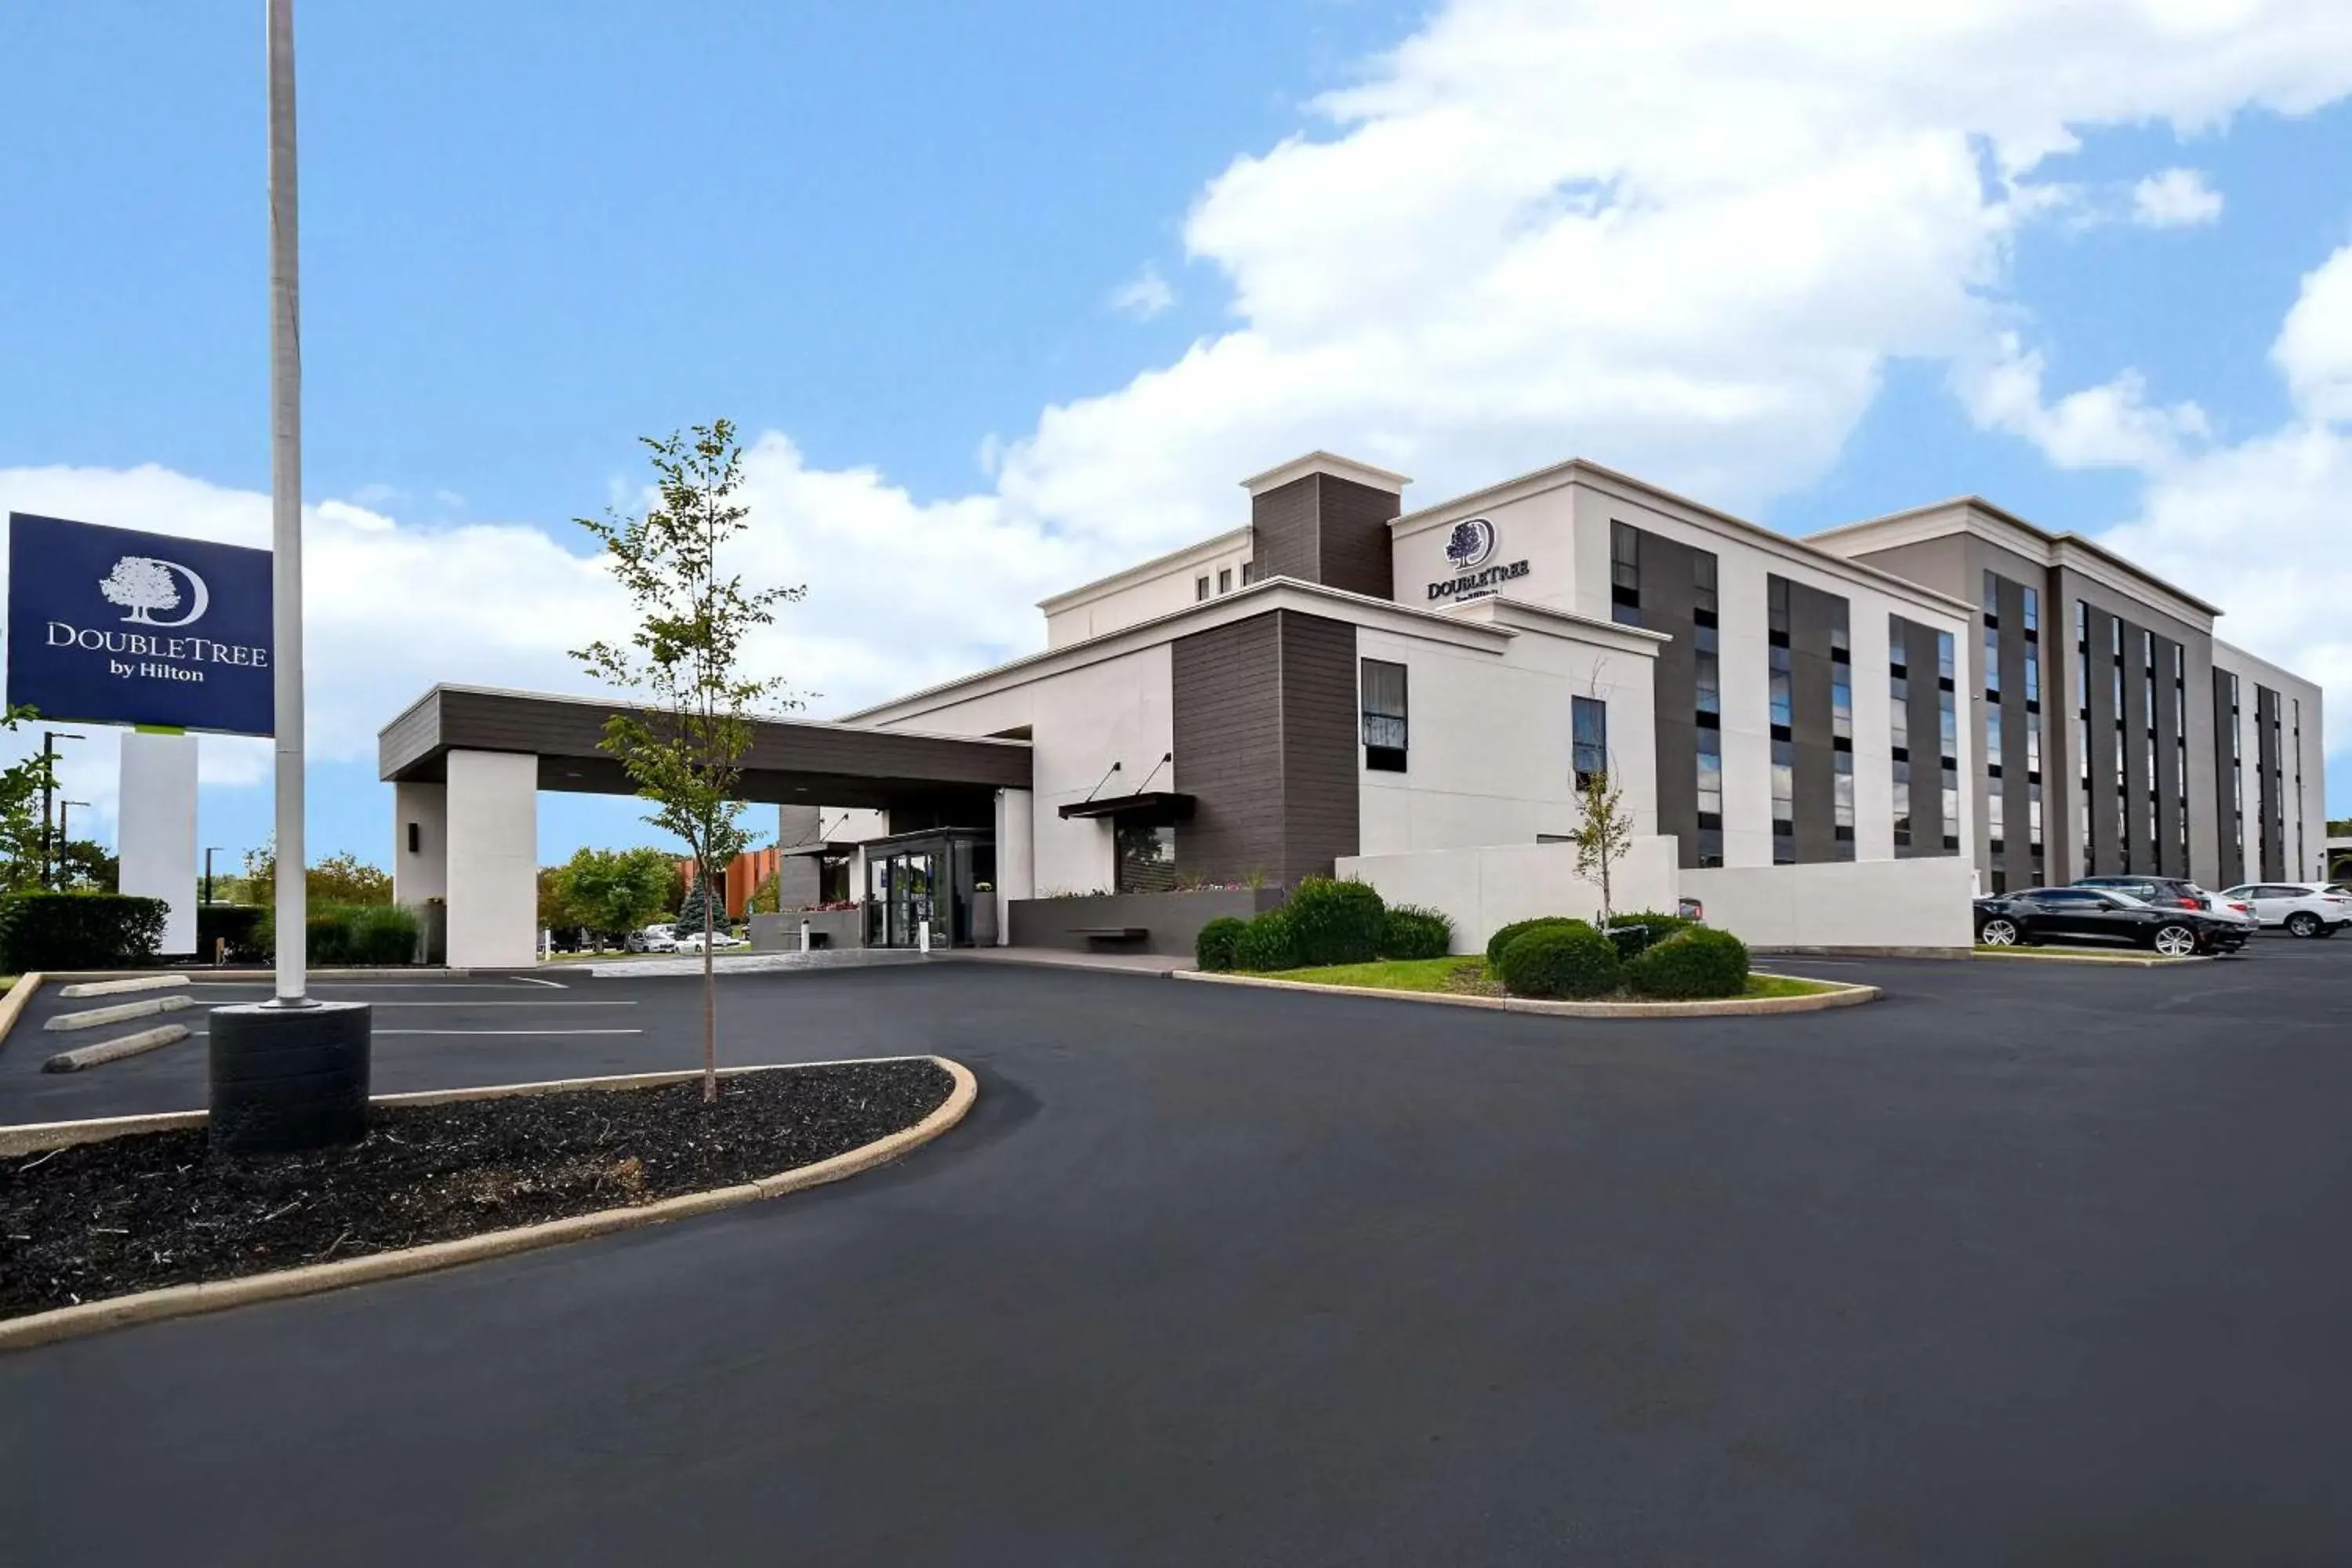 Property Building in DoubleTree by Hilton St. Louis Airport, MO